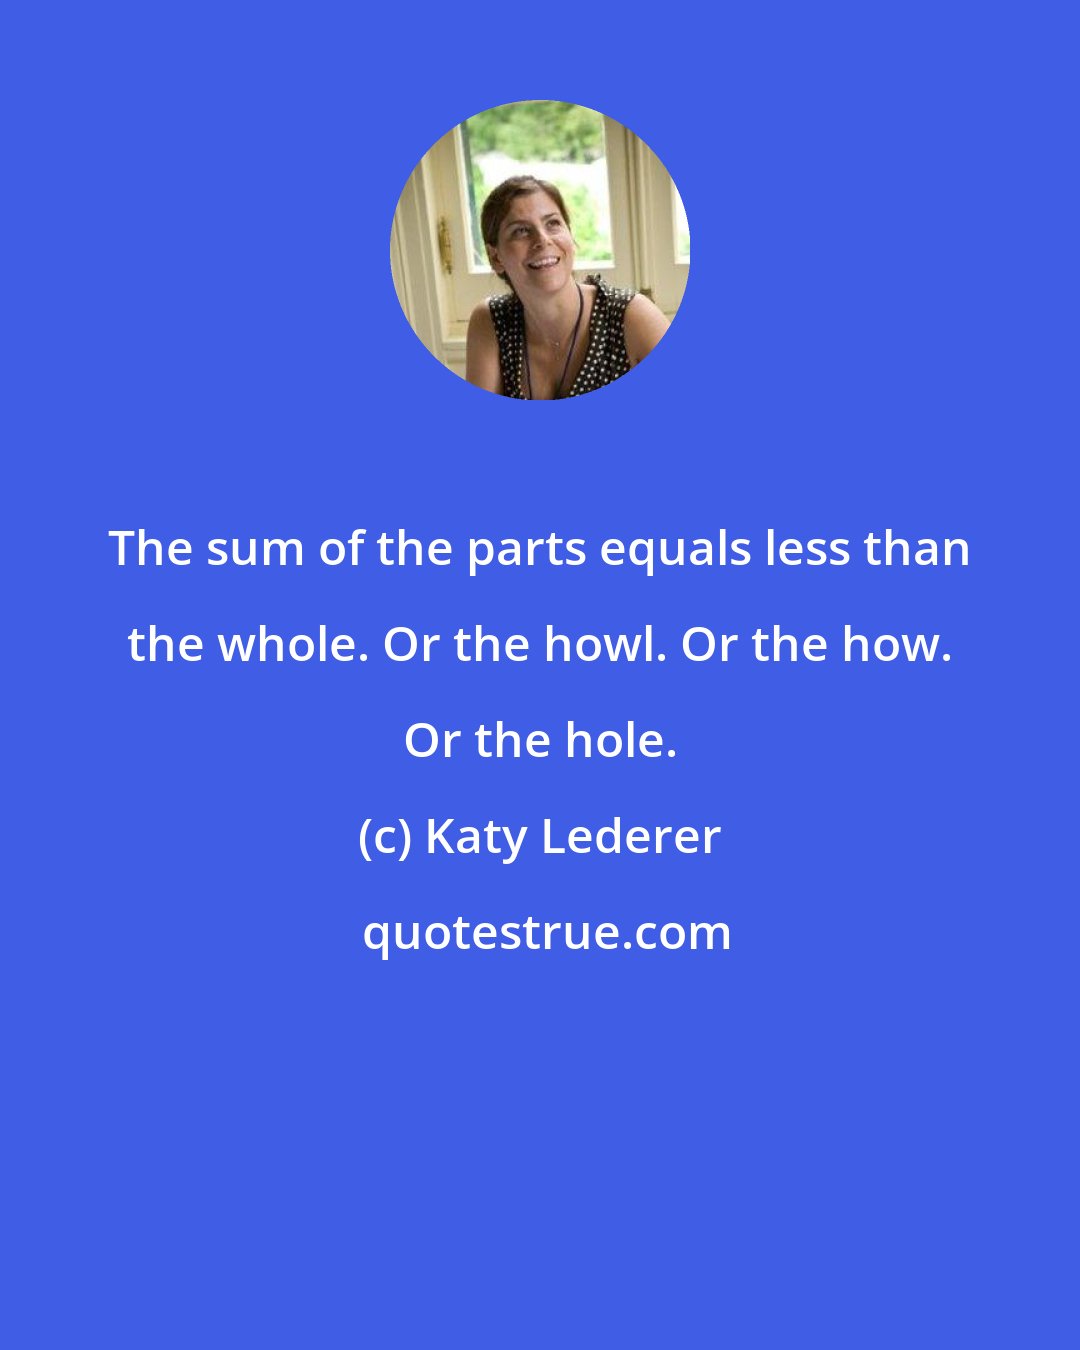 Katy Lederer: The sum of the parts equals less than the whole. Or the howl. Or the how. Or the hole.